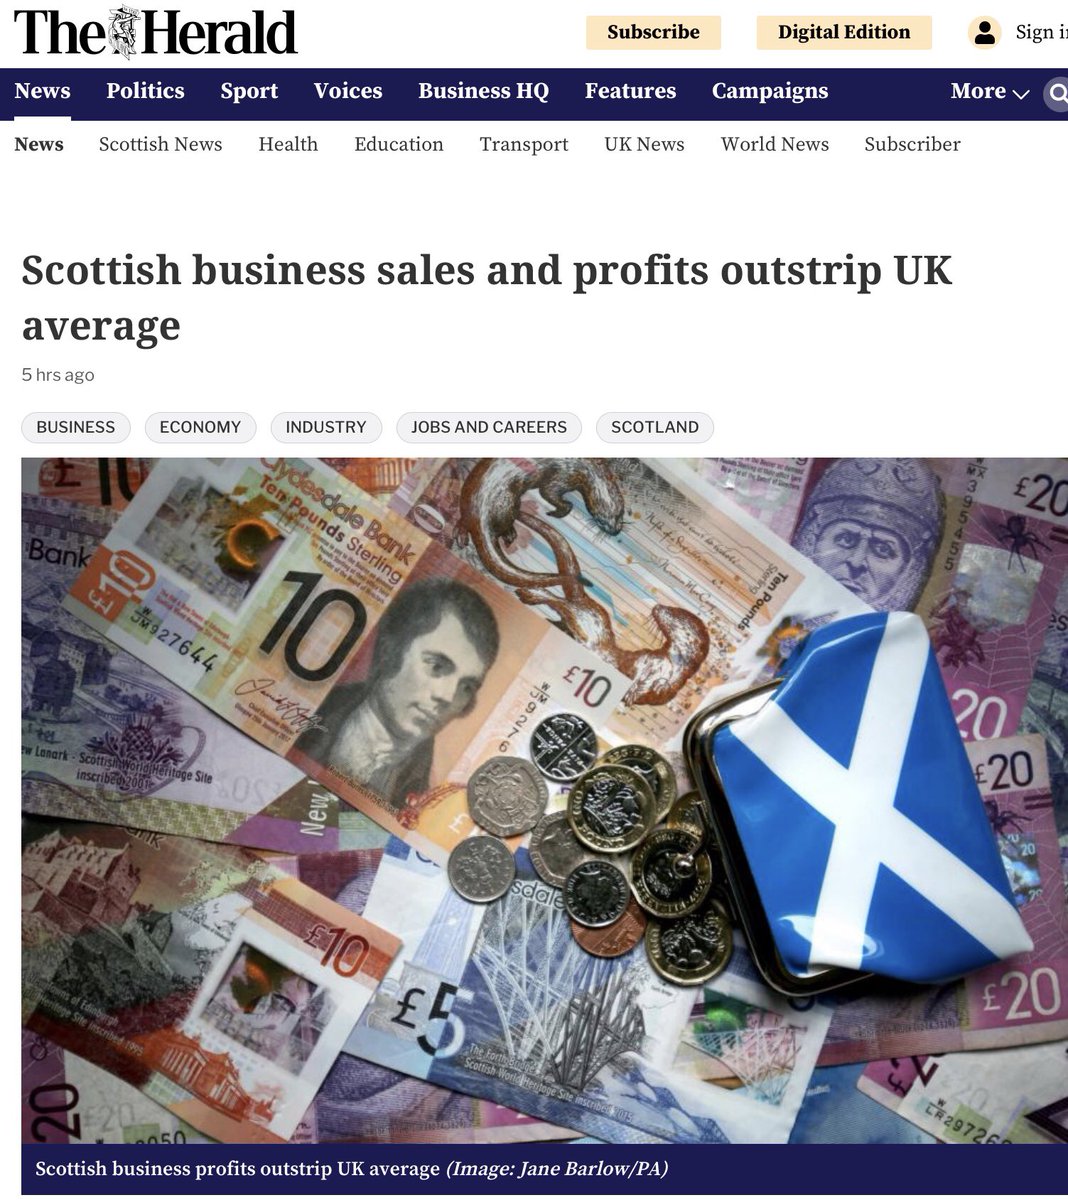 @TomCARR89143229 The evidence is there … Scotland is not a failure, in fact it’s booming compared to rest of UK.